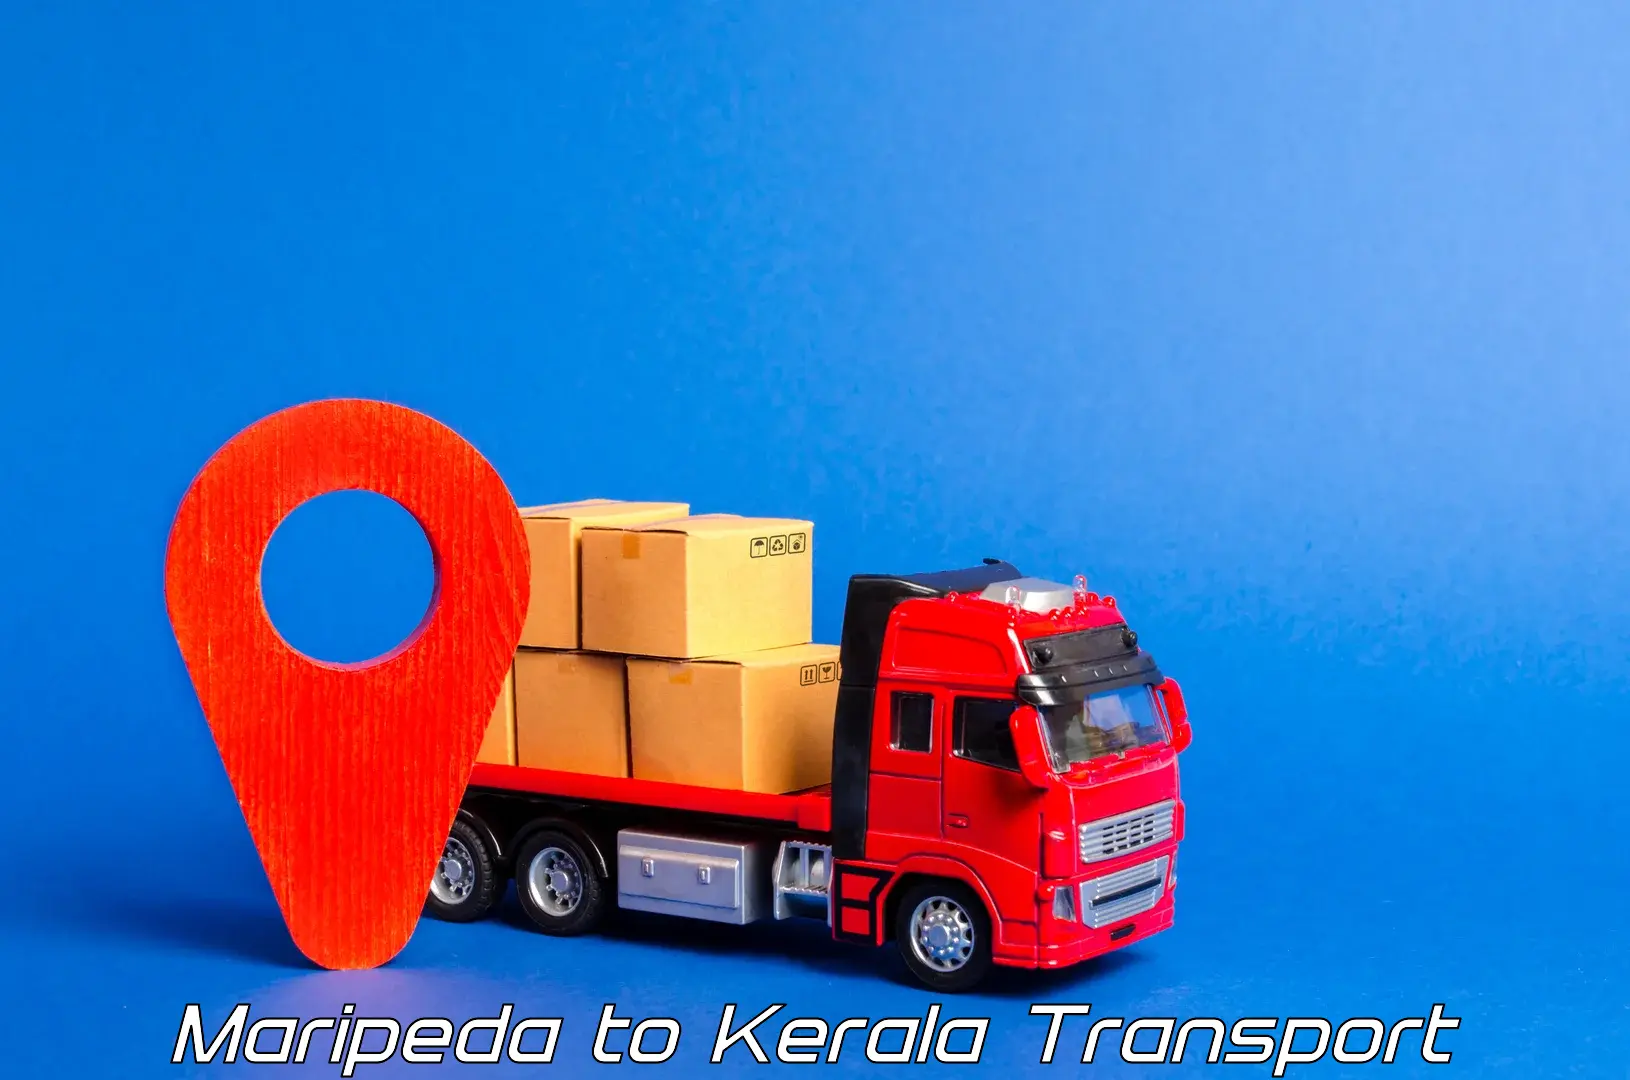 Container transport service Maripeda to Kerala